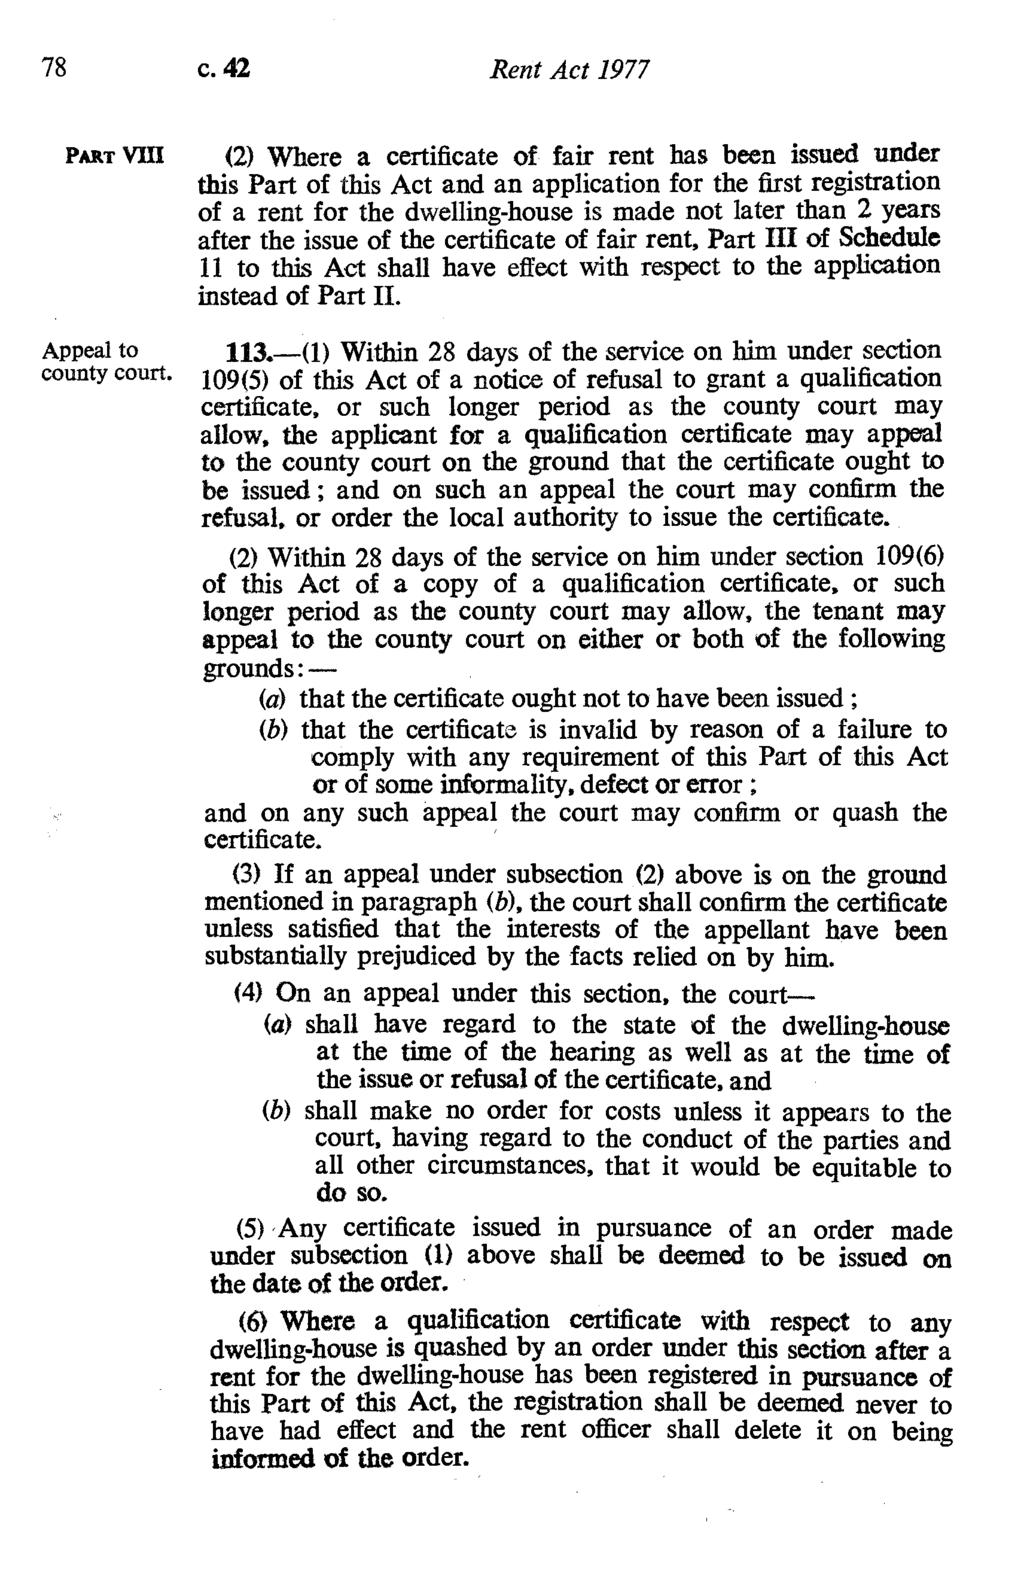 78 c. 42 Rent Act 1977 PART VIII Appeal to county court.